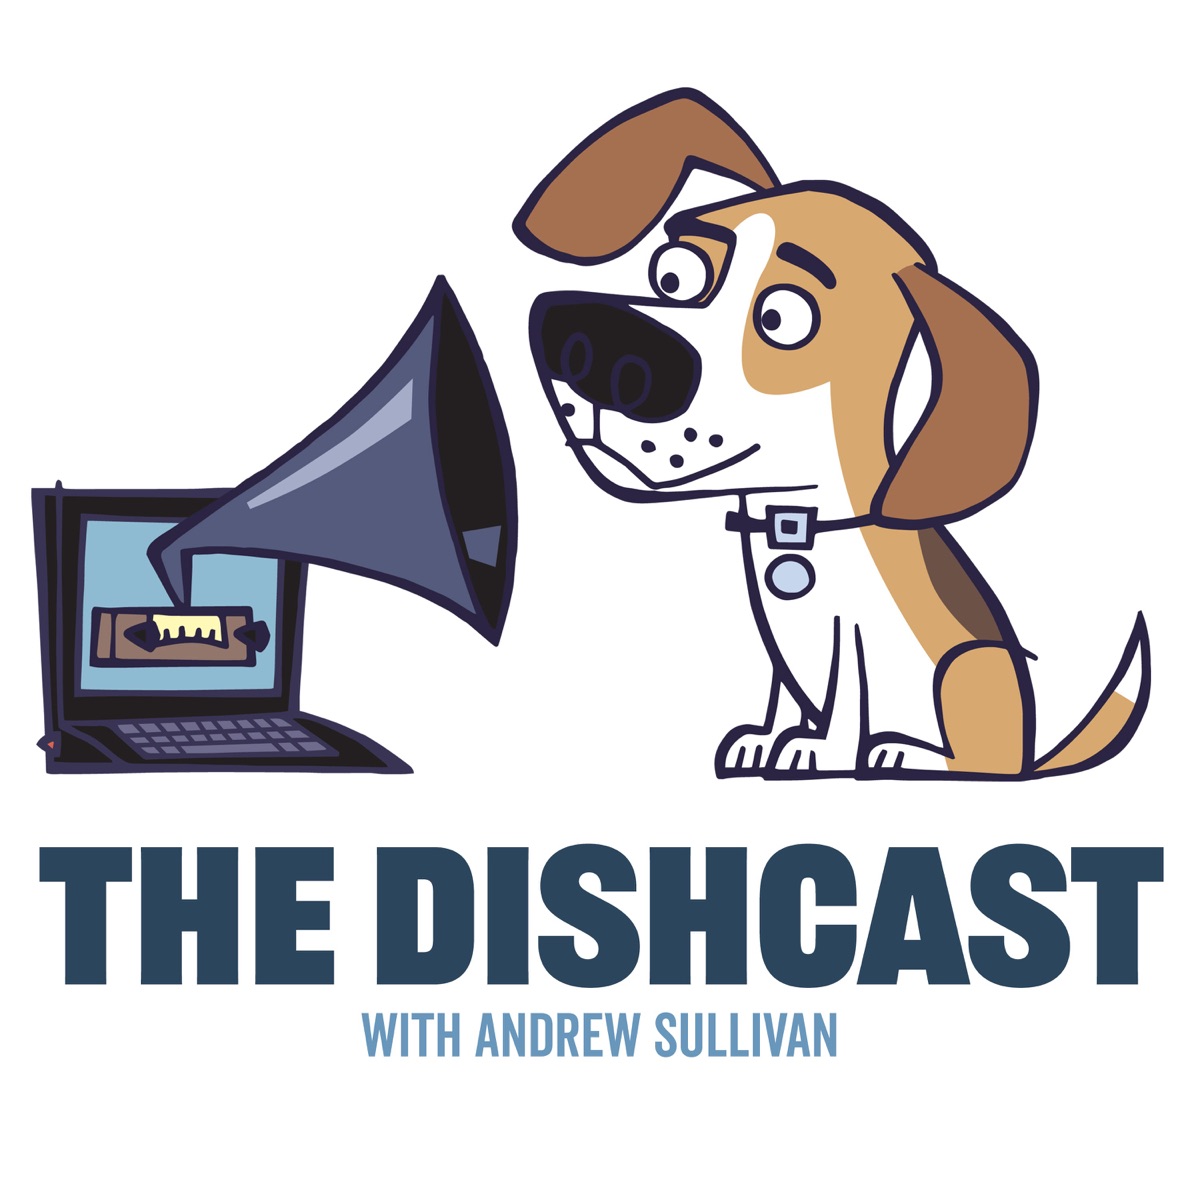 The Dishcast with Andrew Sullivan â€“ Podcast â€“ Podtail